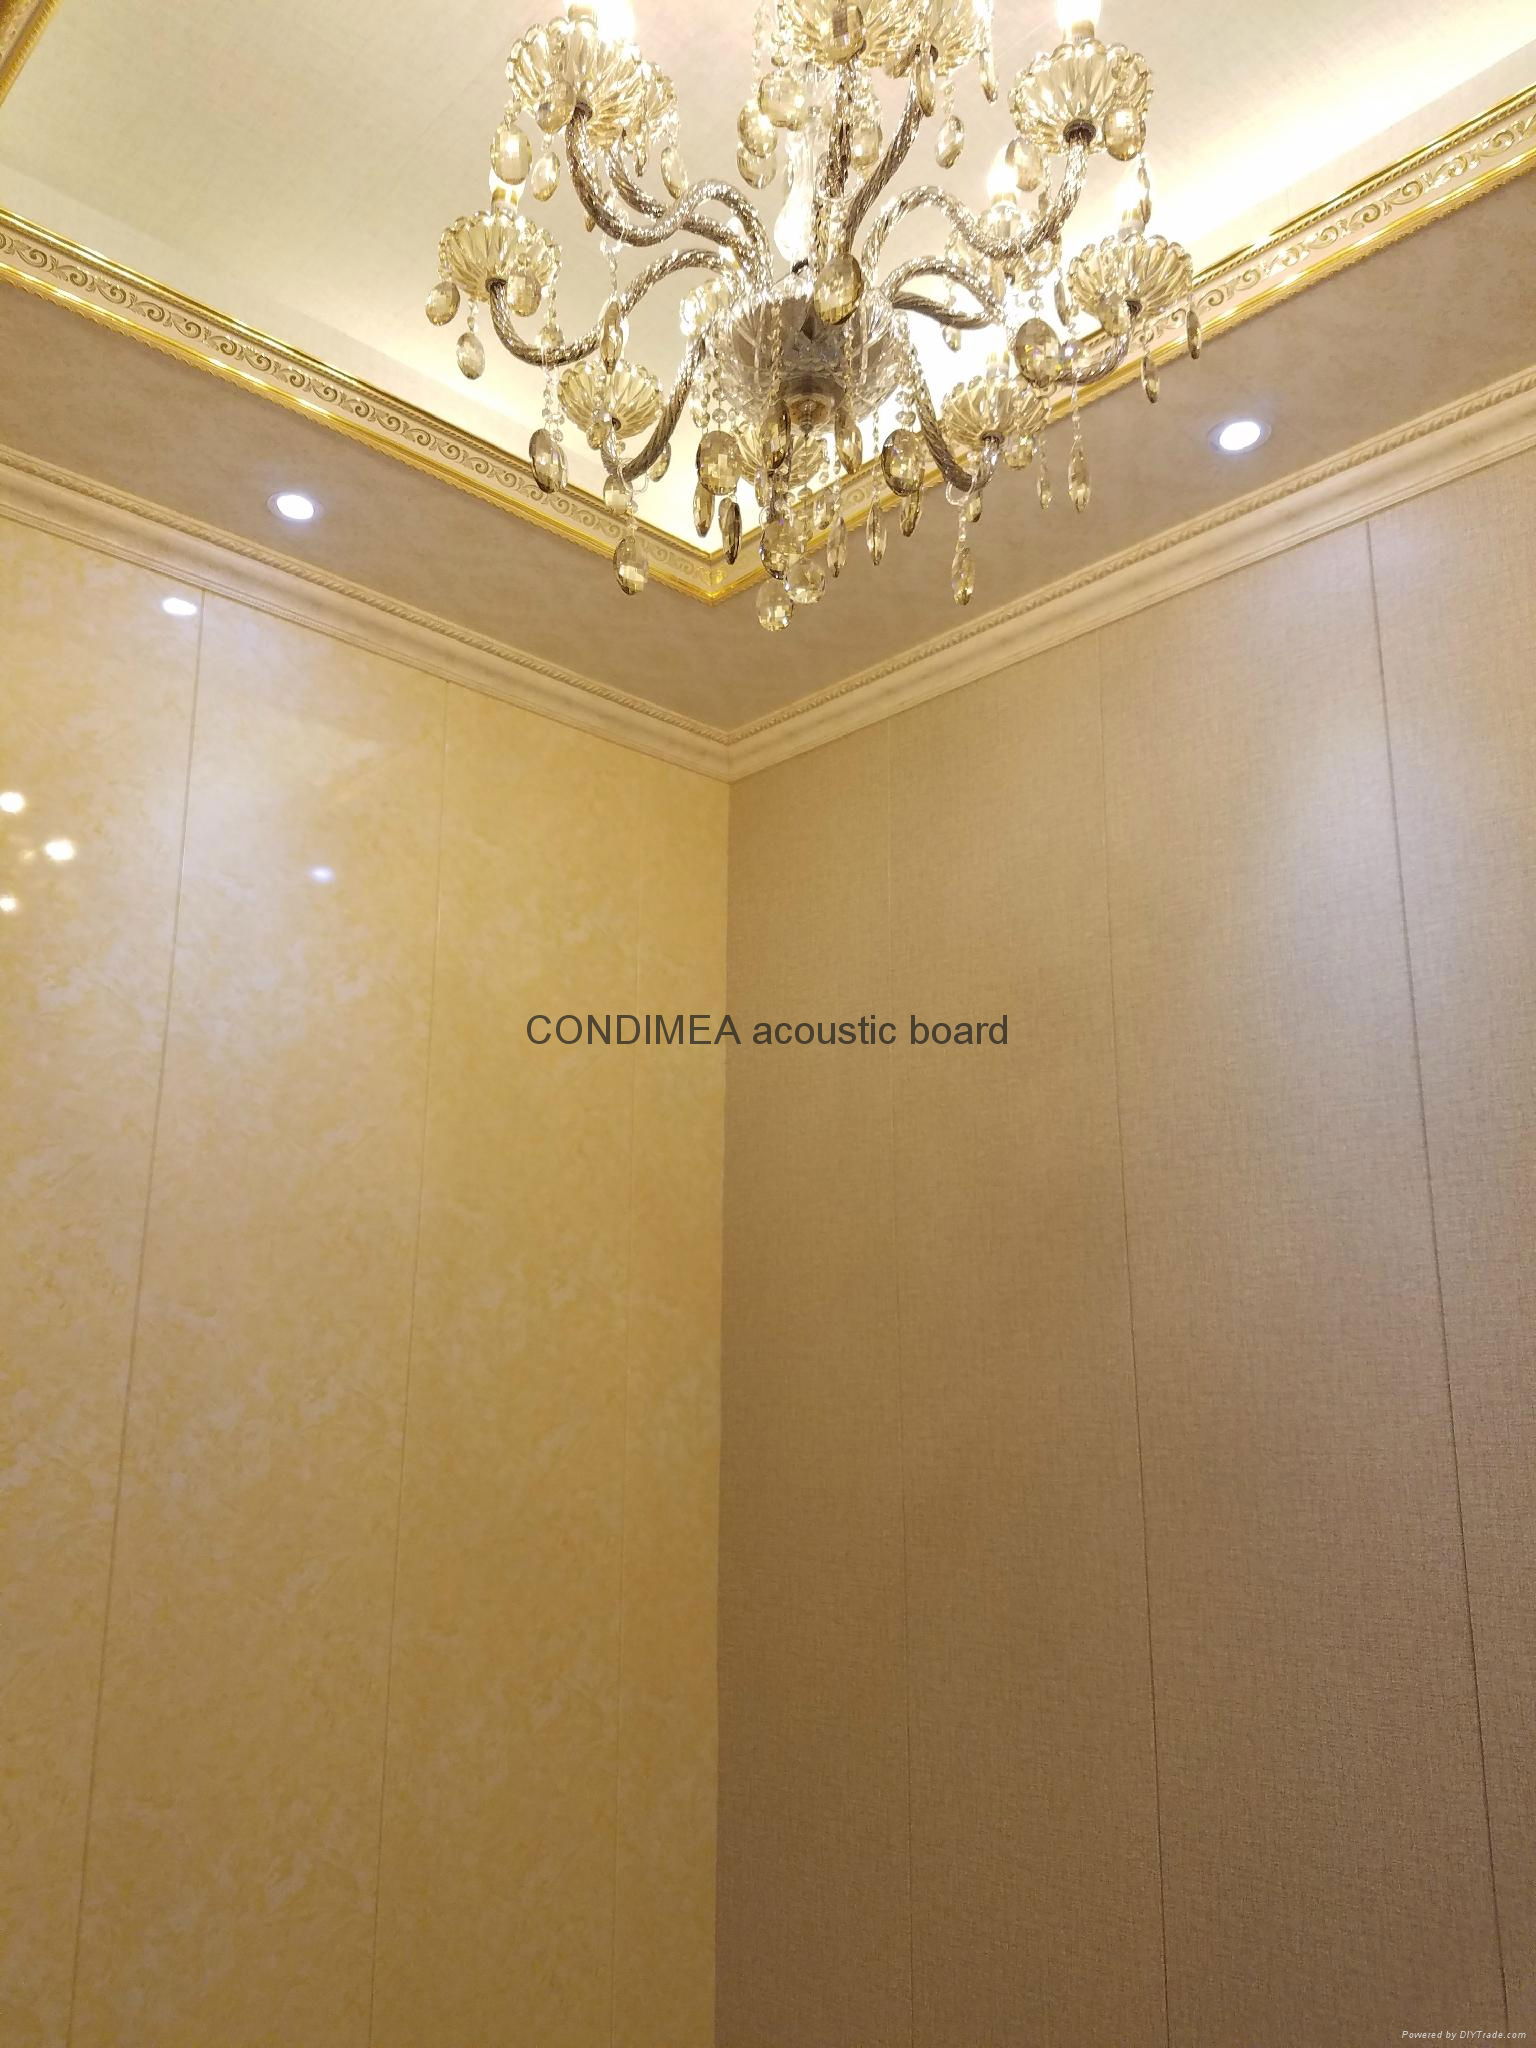 Condimea metal & PU acoustic board with sound insulation of 29dB